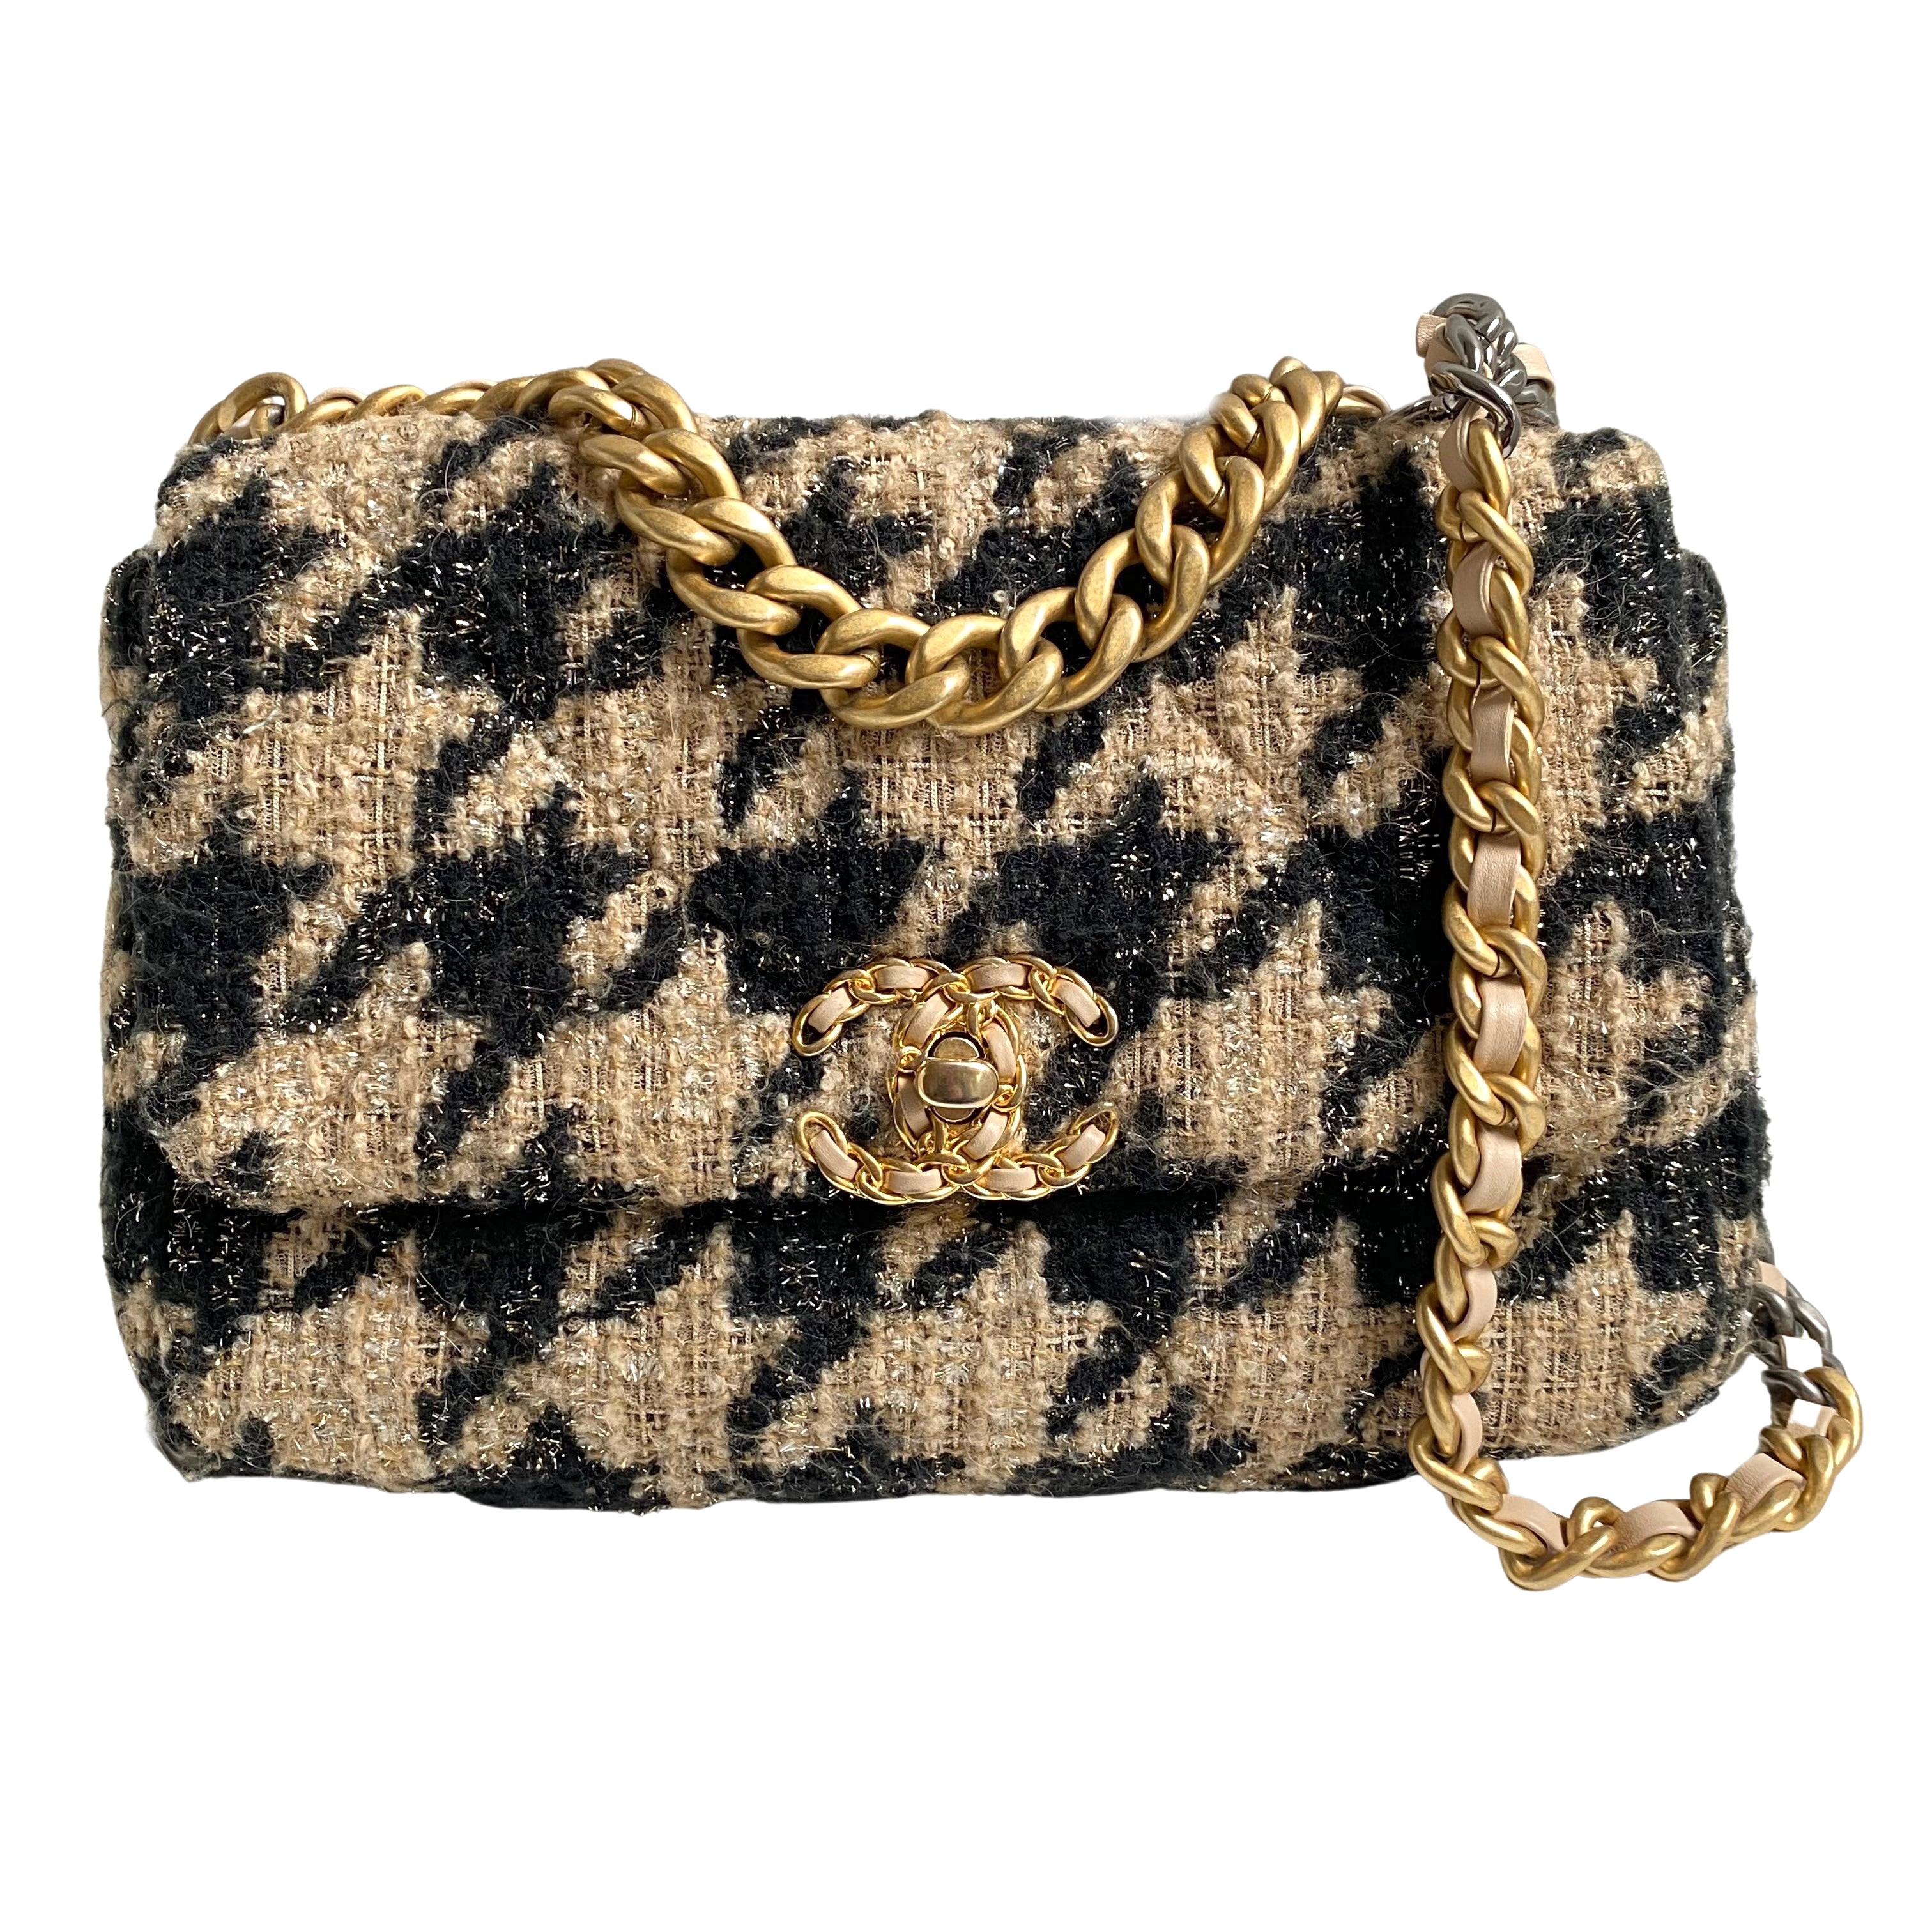 Chanel Black White Tweed Quilted Medium Chanel 19 Flap Bag